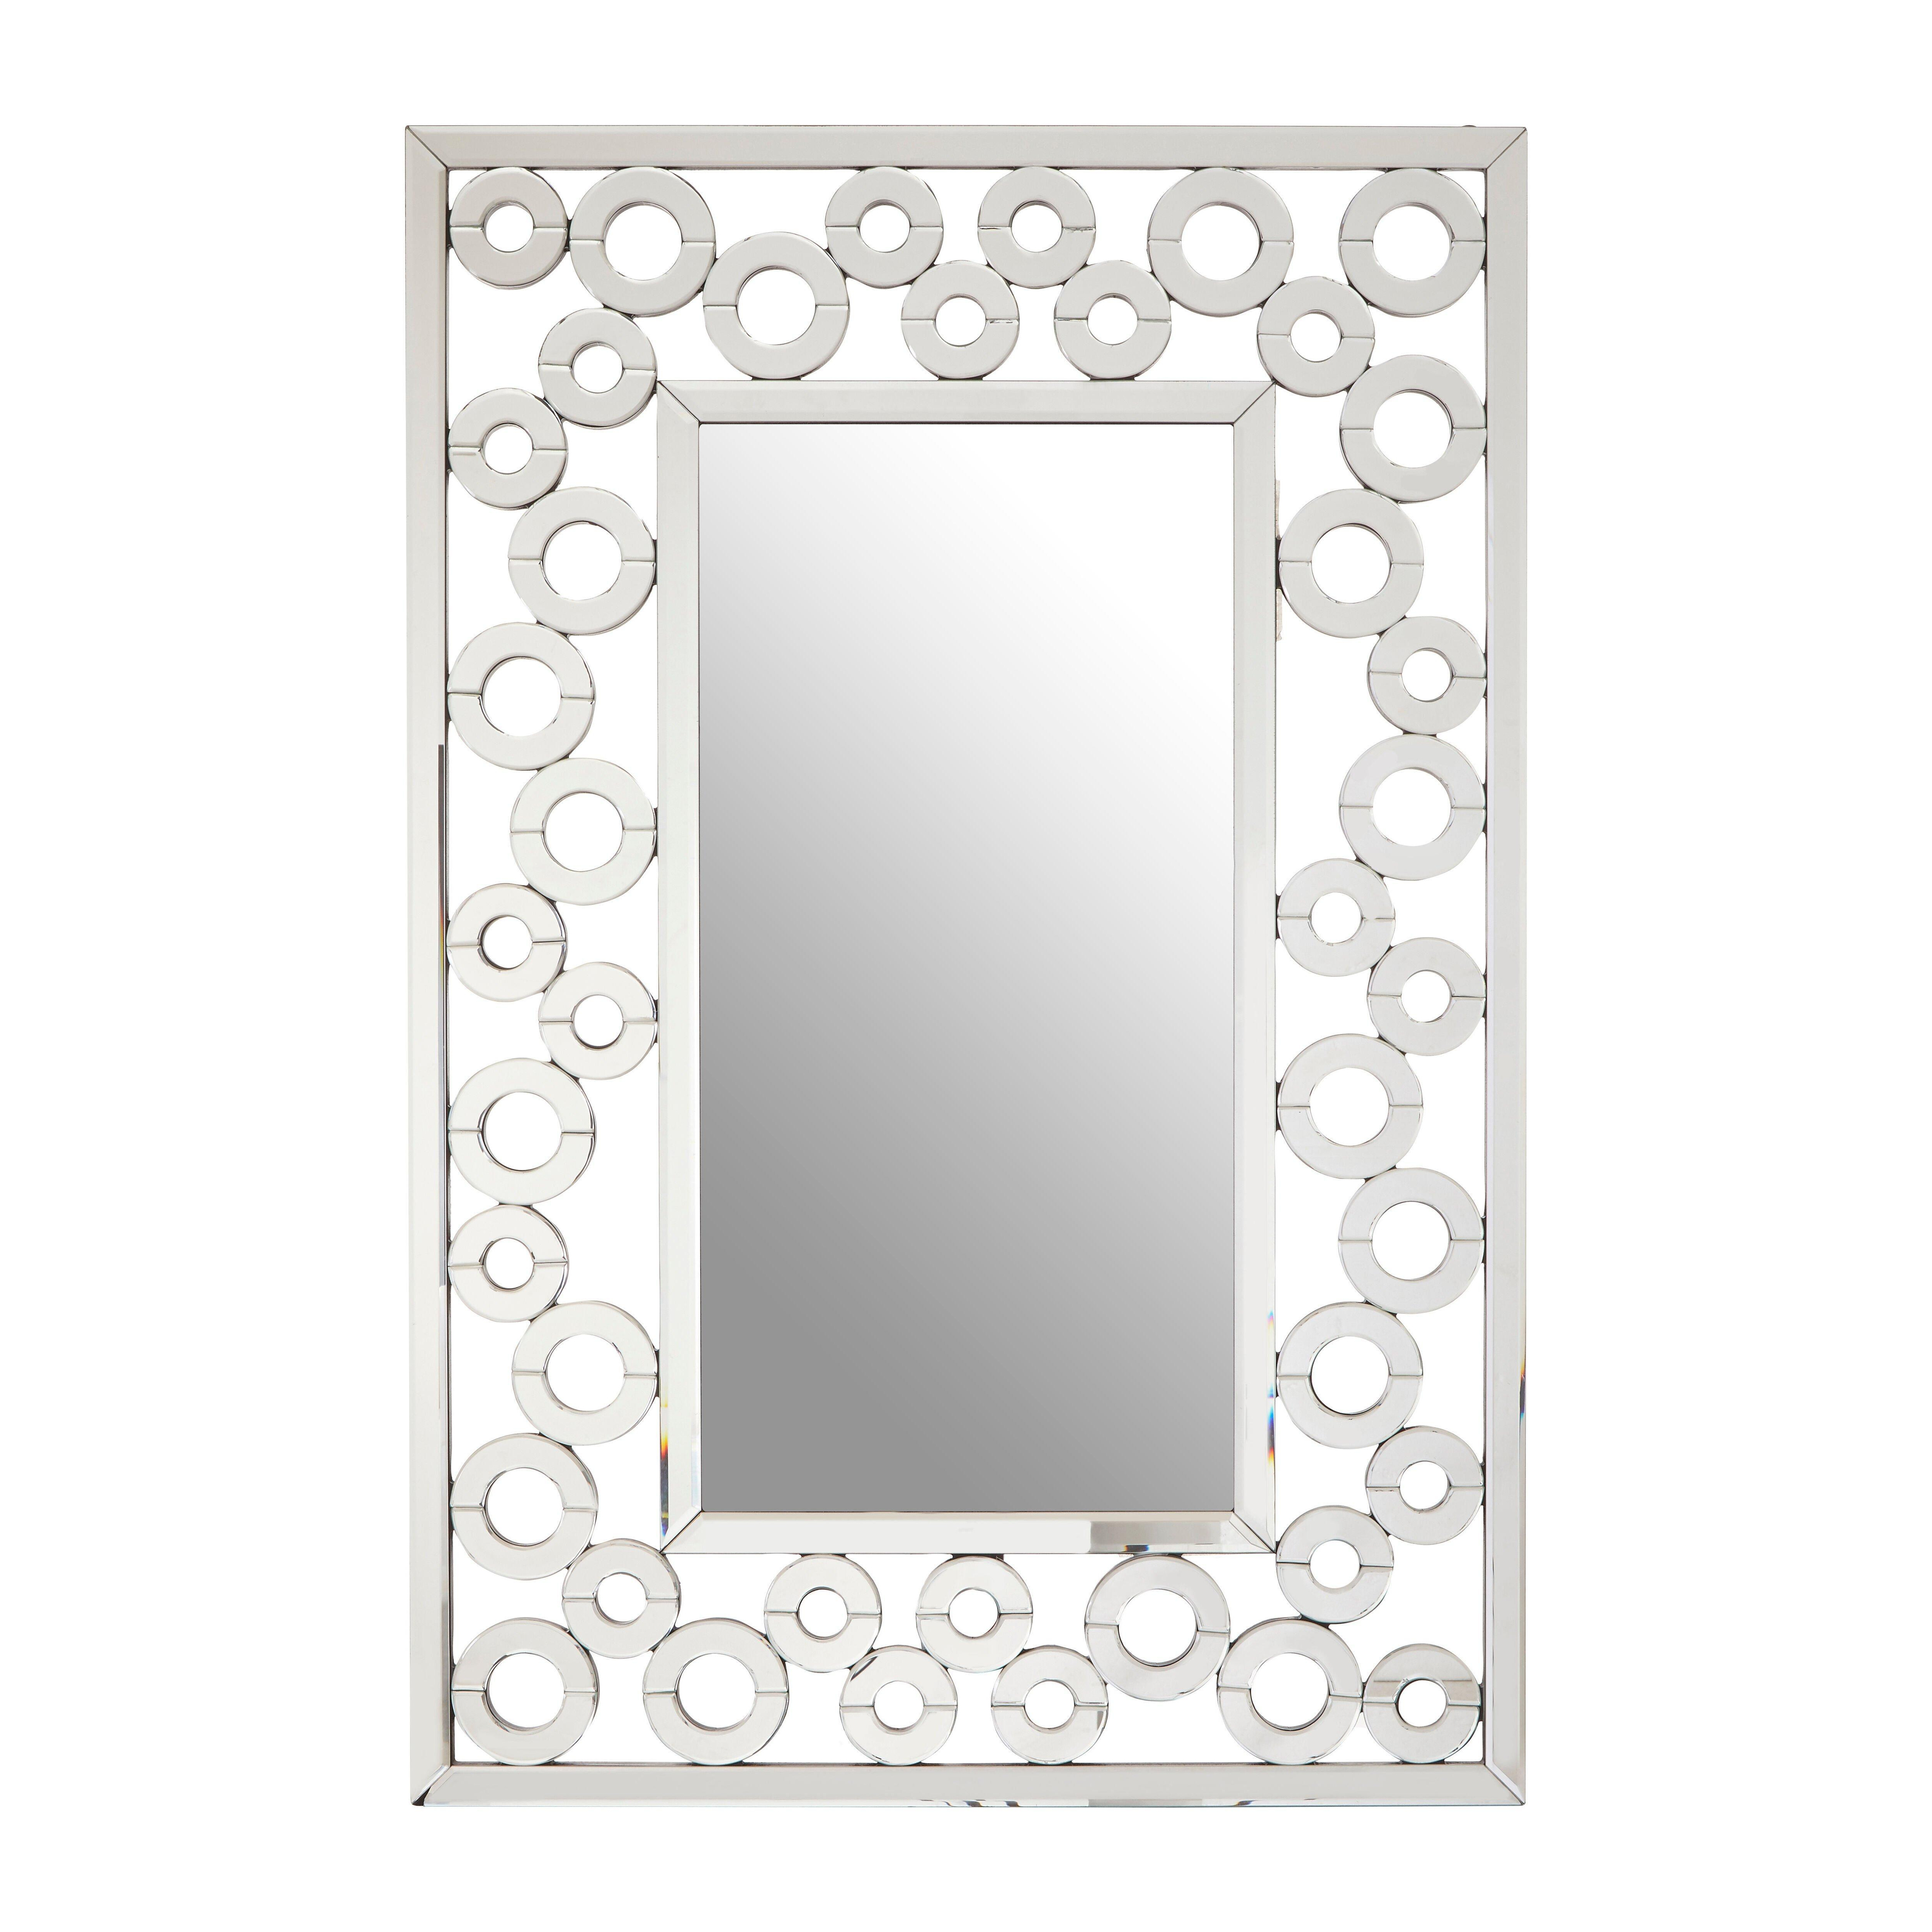 Puzzle Wall Mirror with Scrolled Frame - image 1